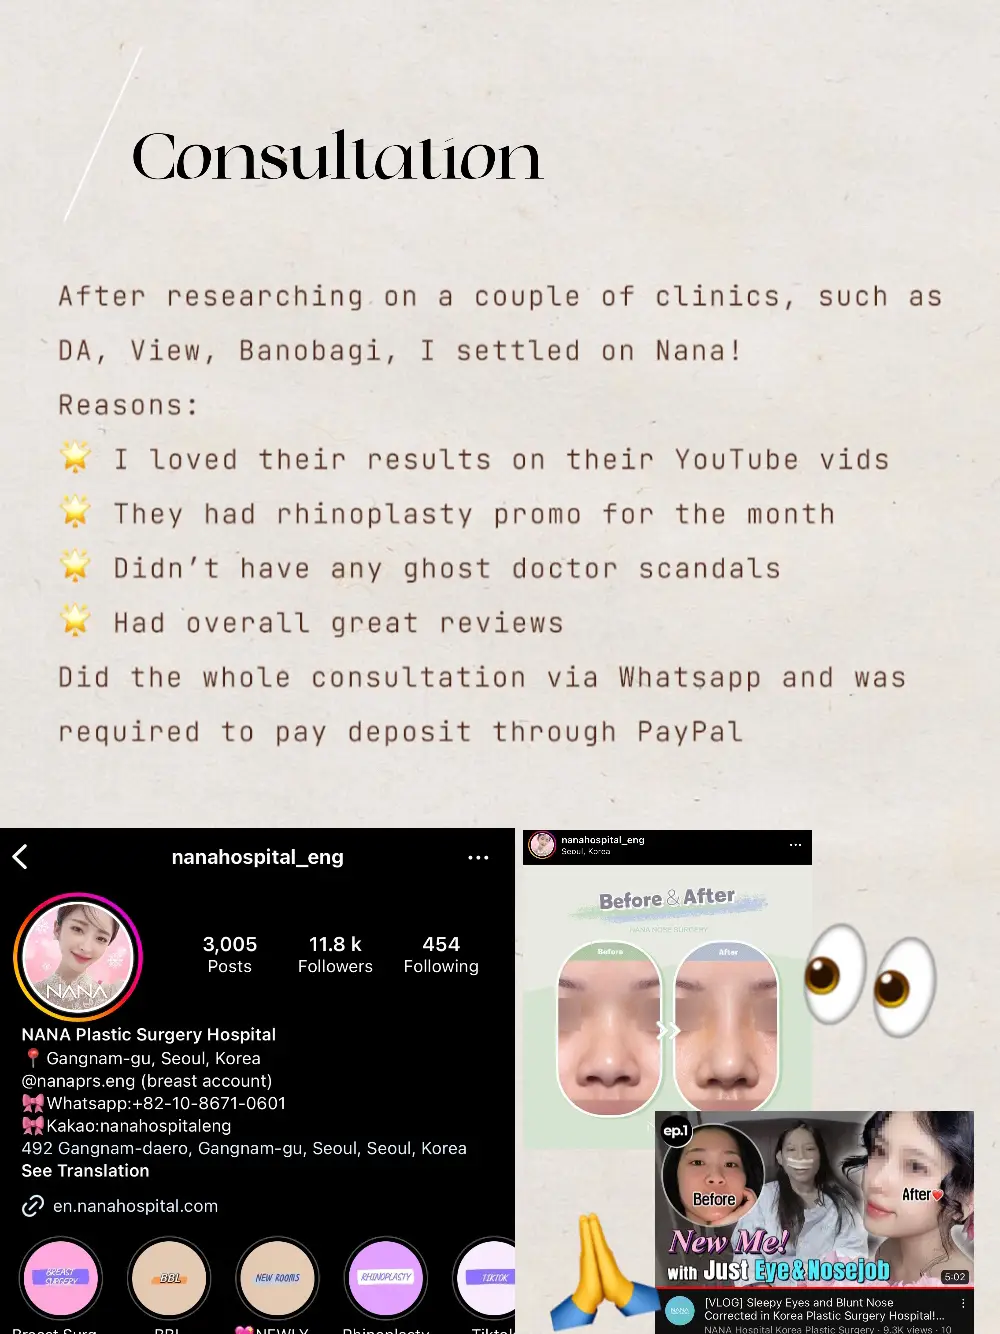 Got a nose job in Korea 🤕 (Price + Recovery!)'s images(2)